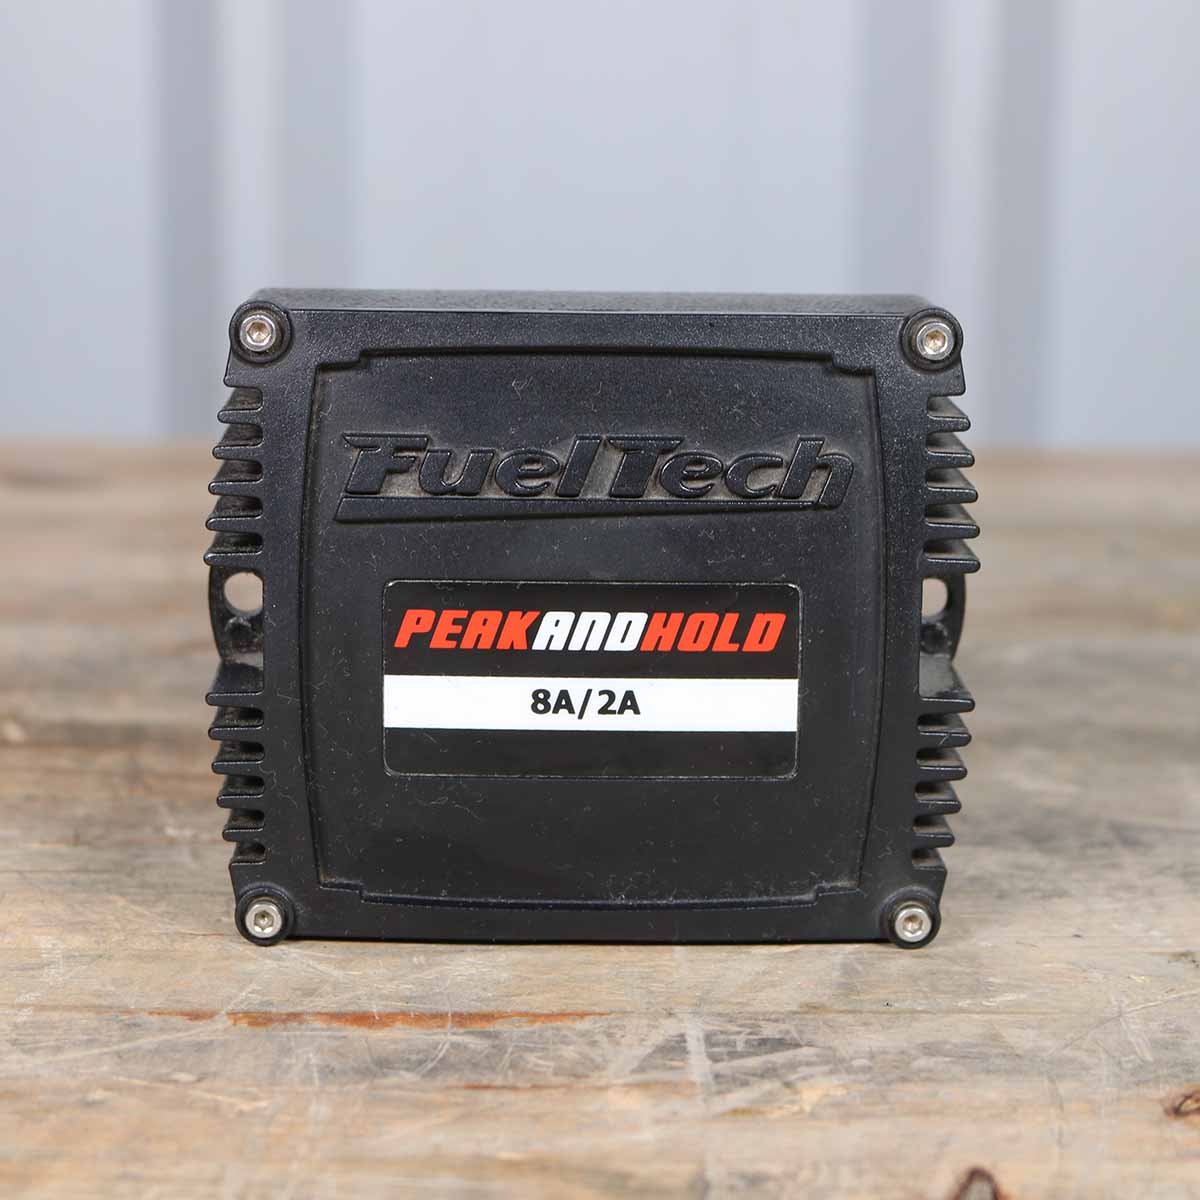 FUELTECH PEAK & HOLD INJECTOR DRIVER 8A/2A (NO HARNESS)